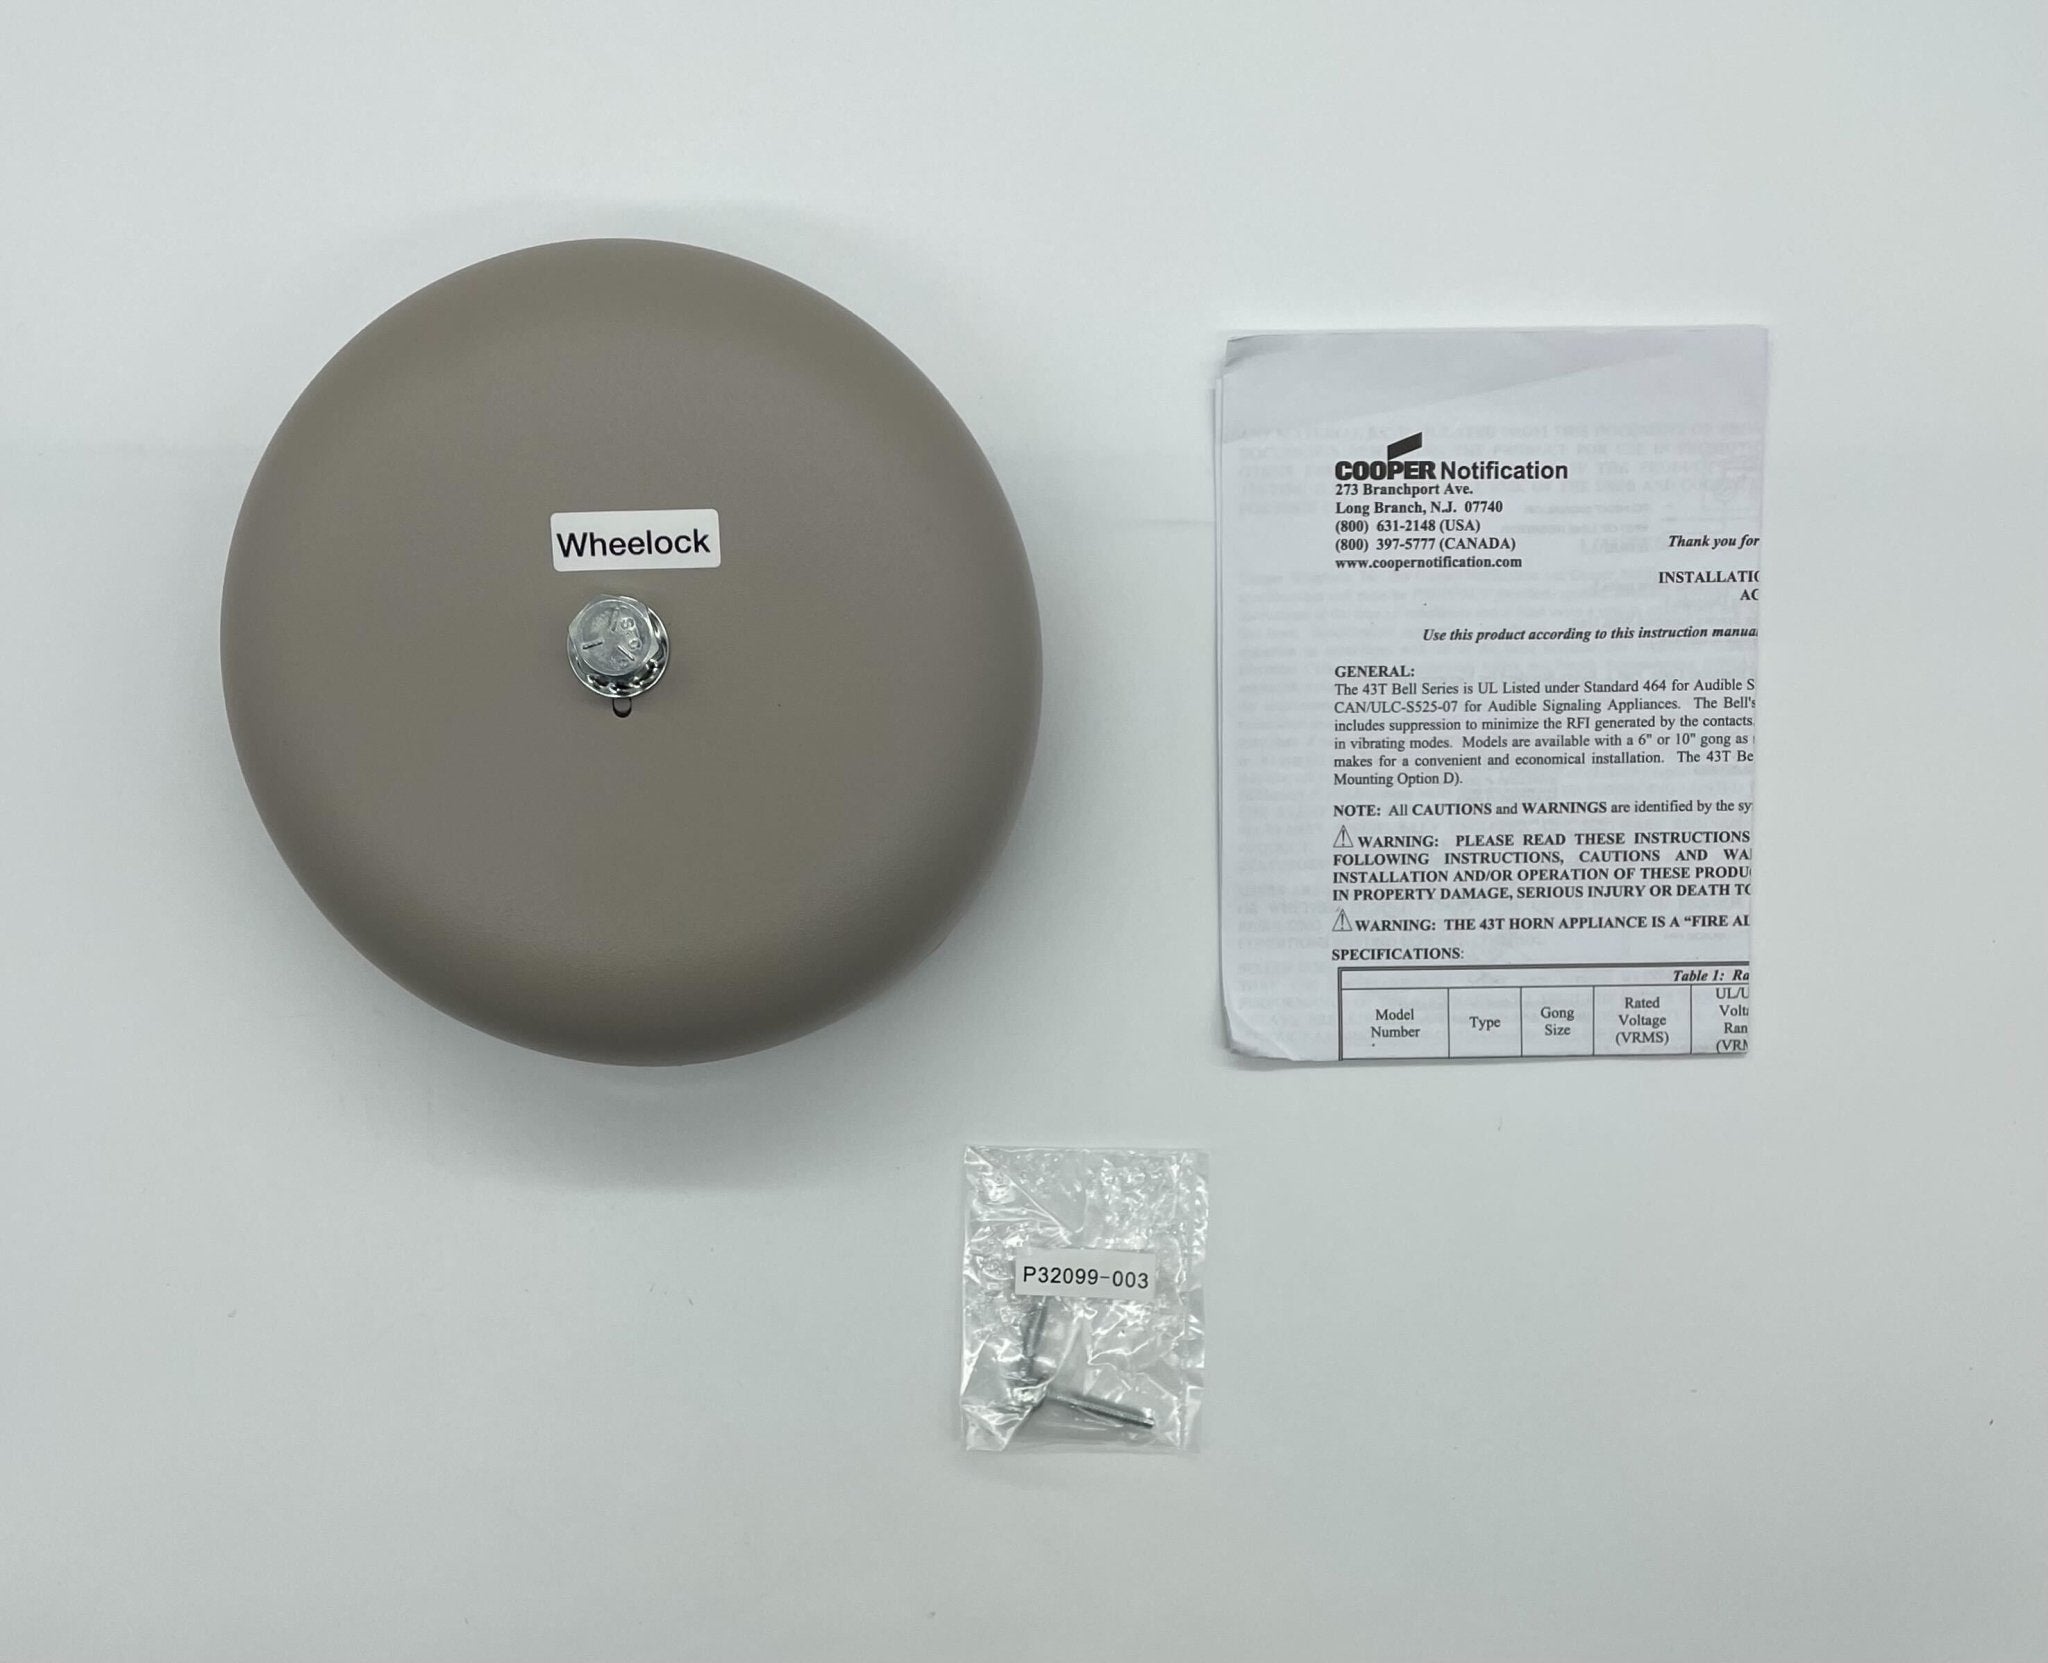 Wheelock 43T-G6-115-S - The Fire Alarm Supplier